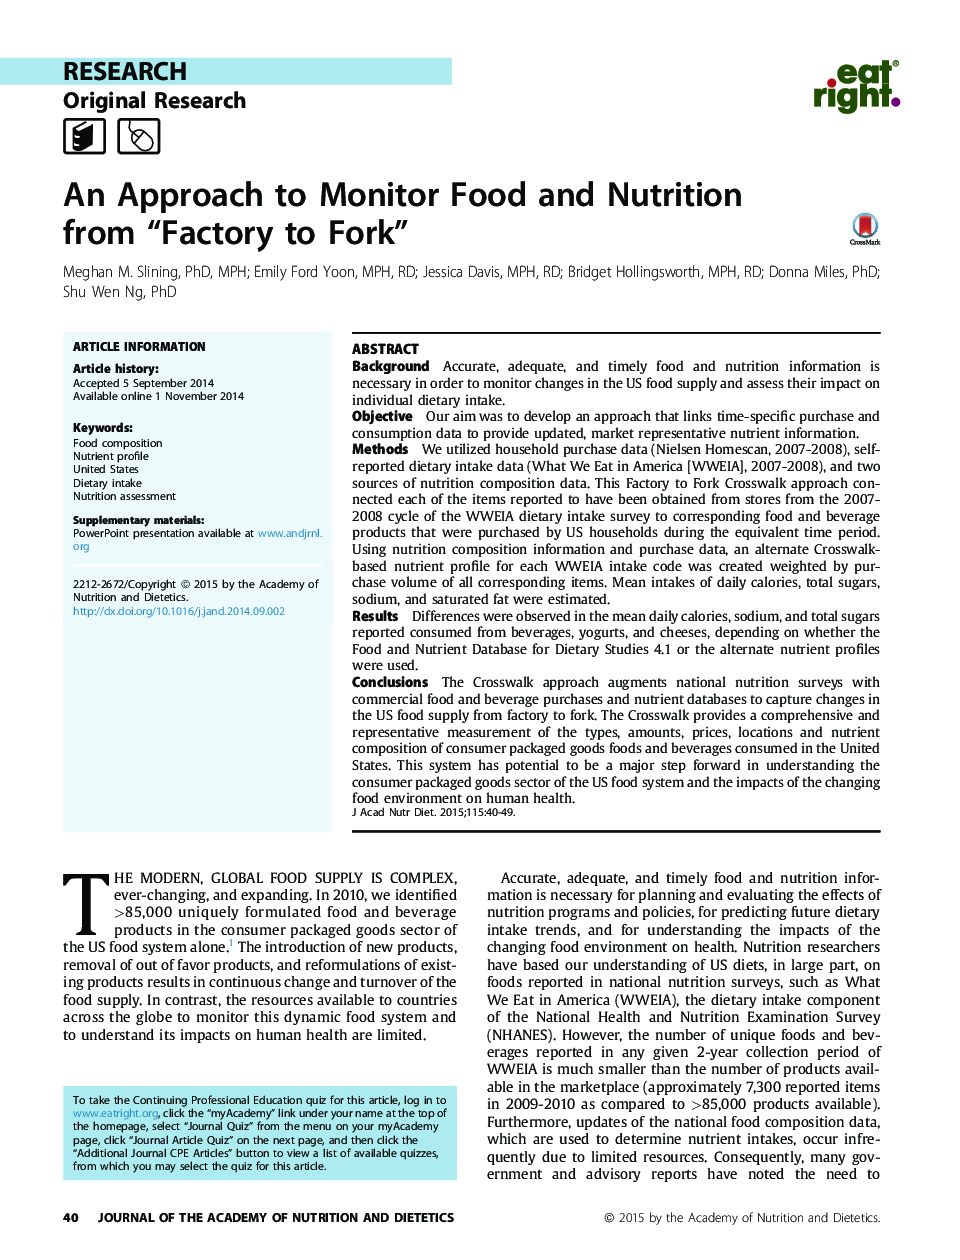 An Approach to Monitor Food and Nutrition from “Factory to Fork” 